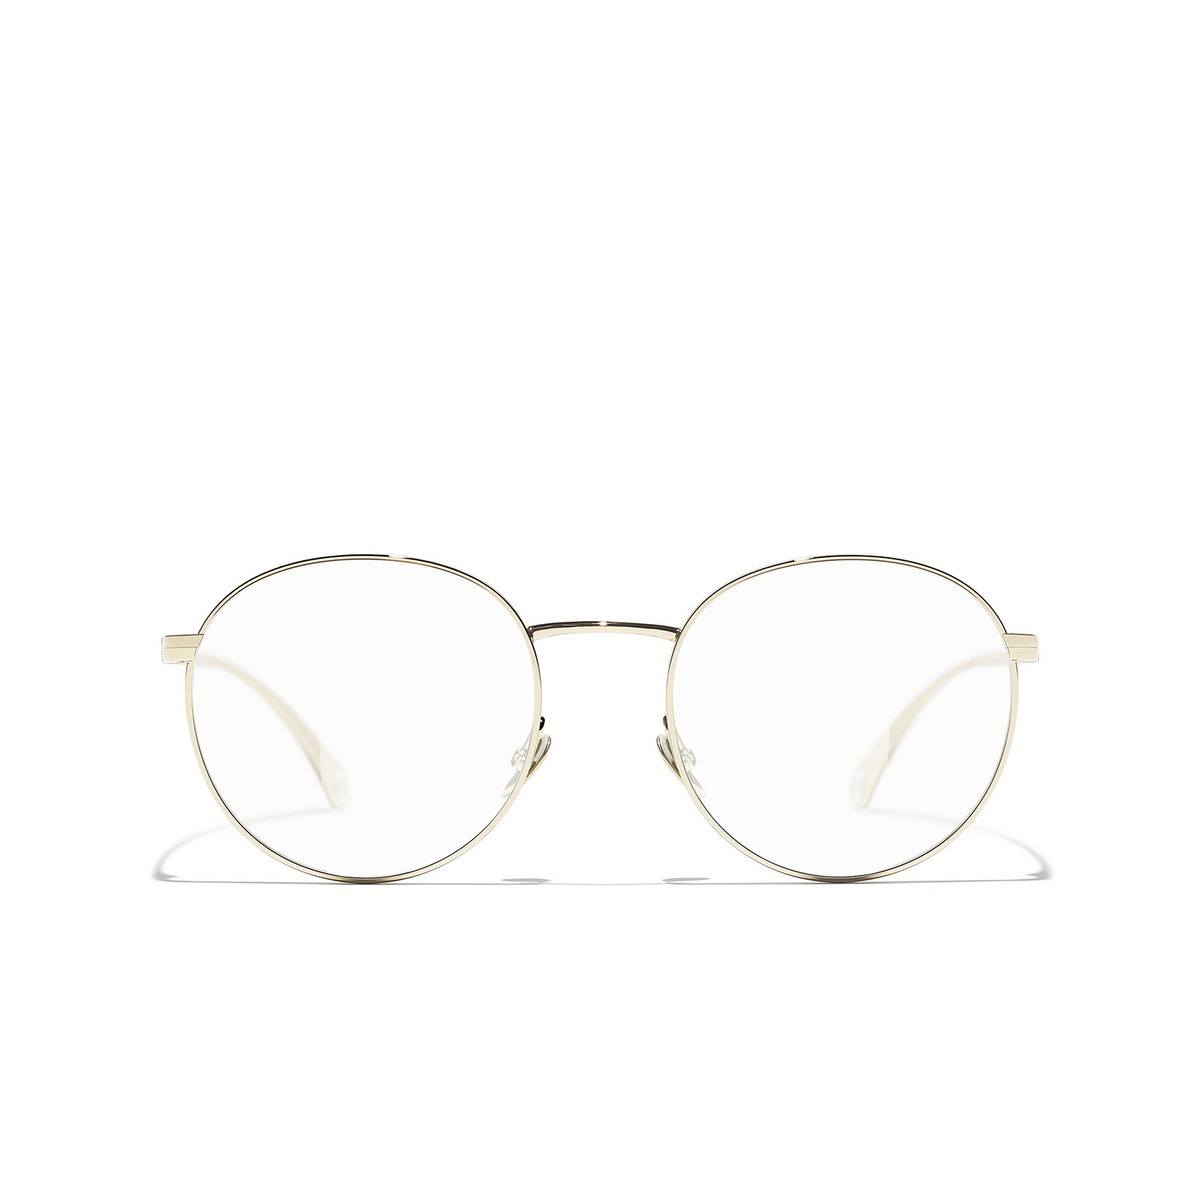 CHANEL oval Eyeglasses C395 Gold - front view